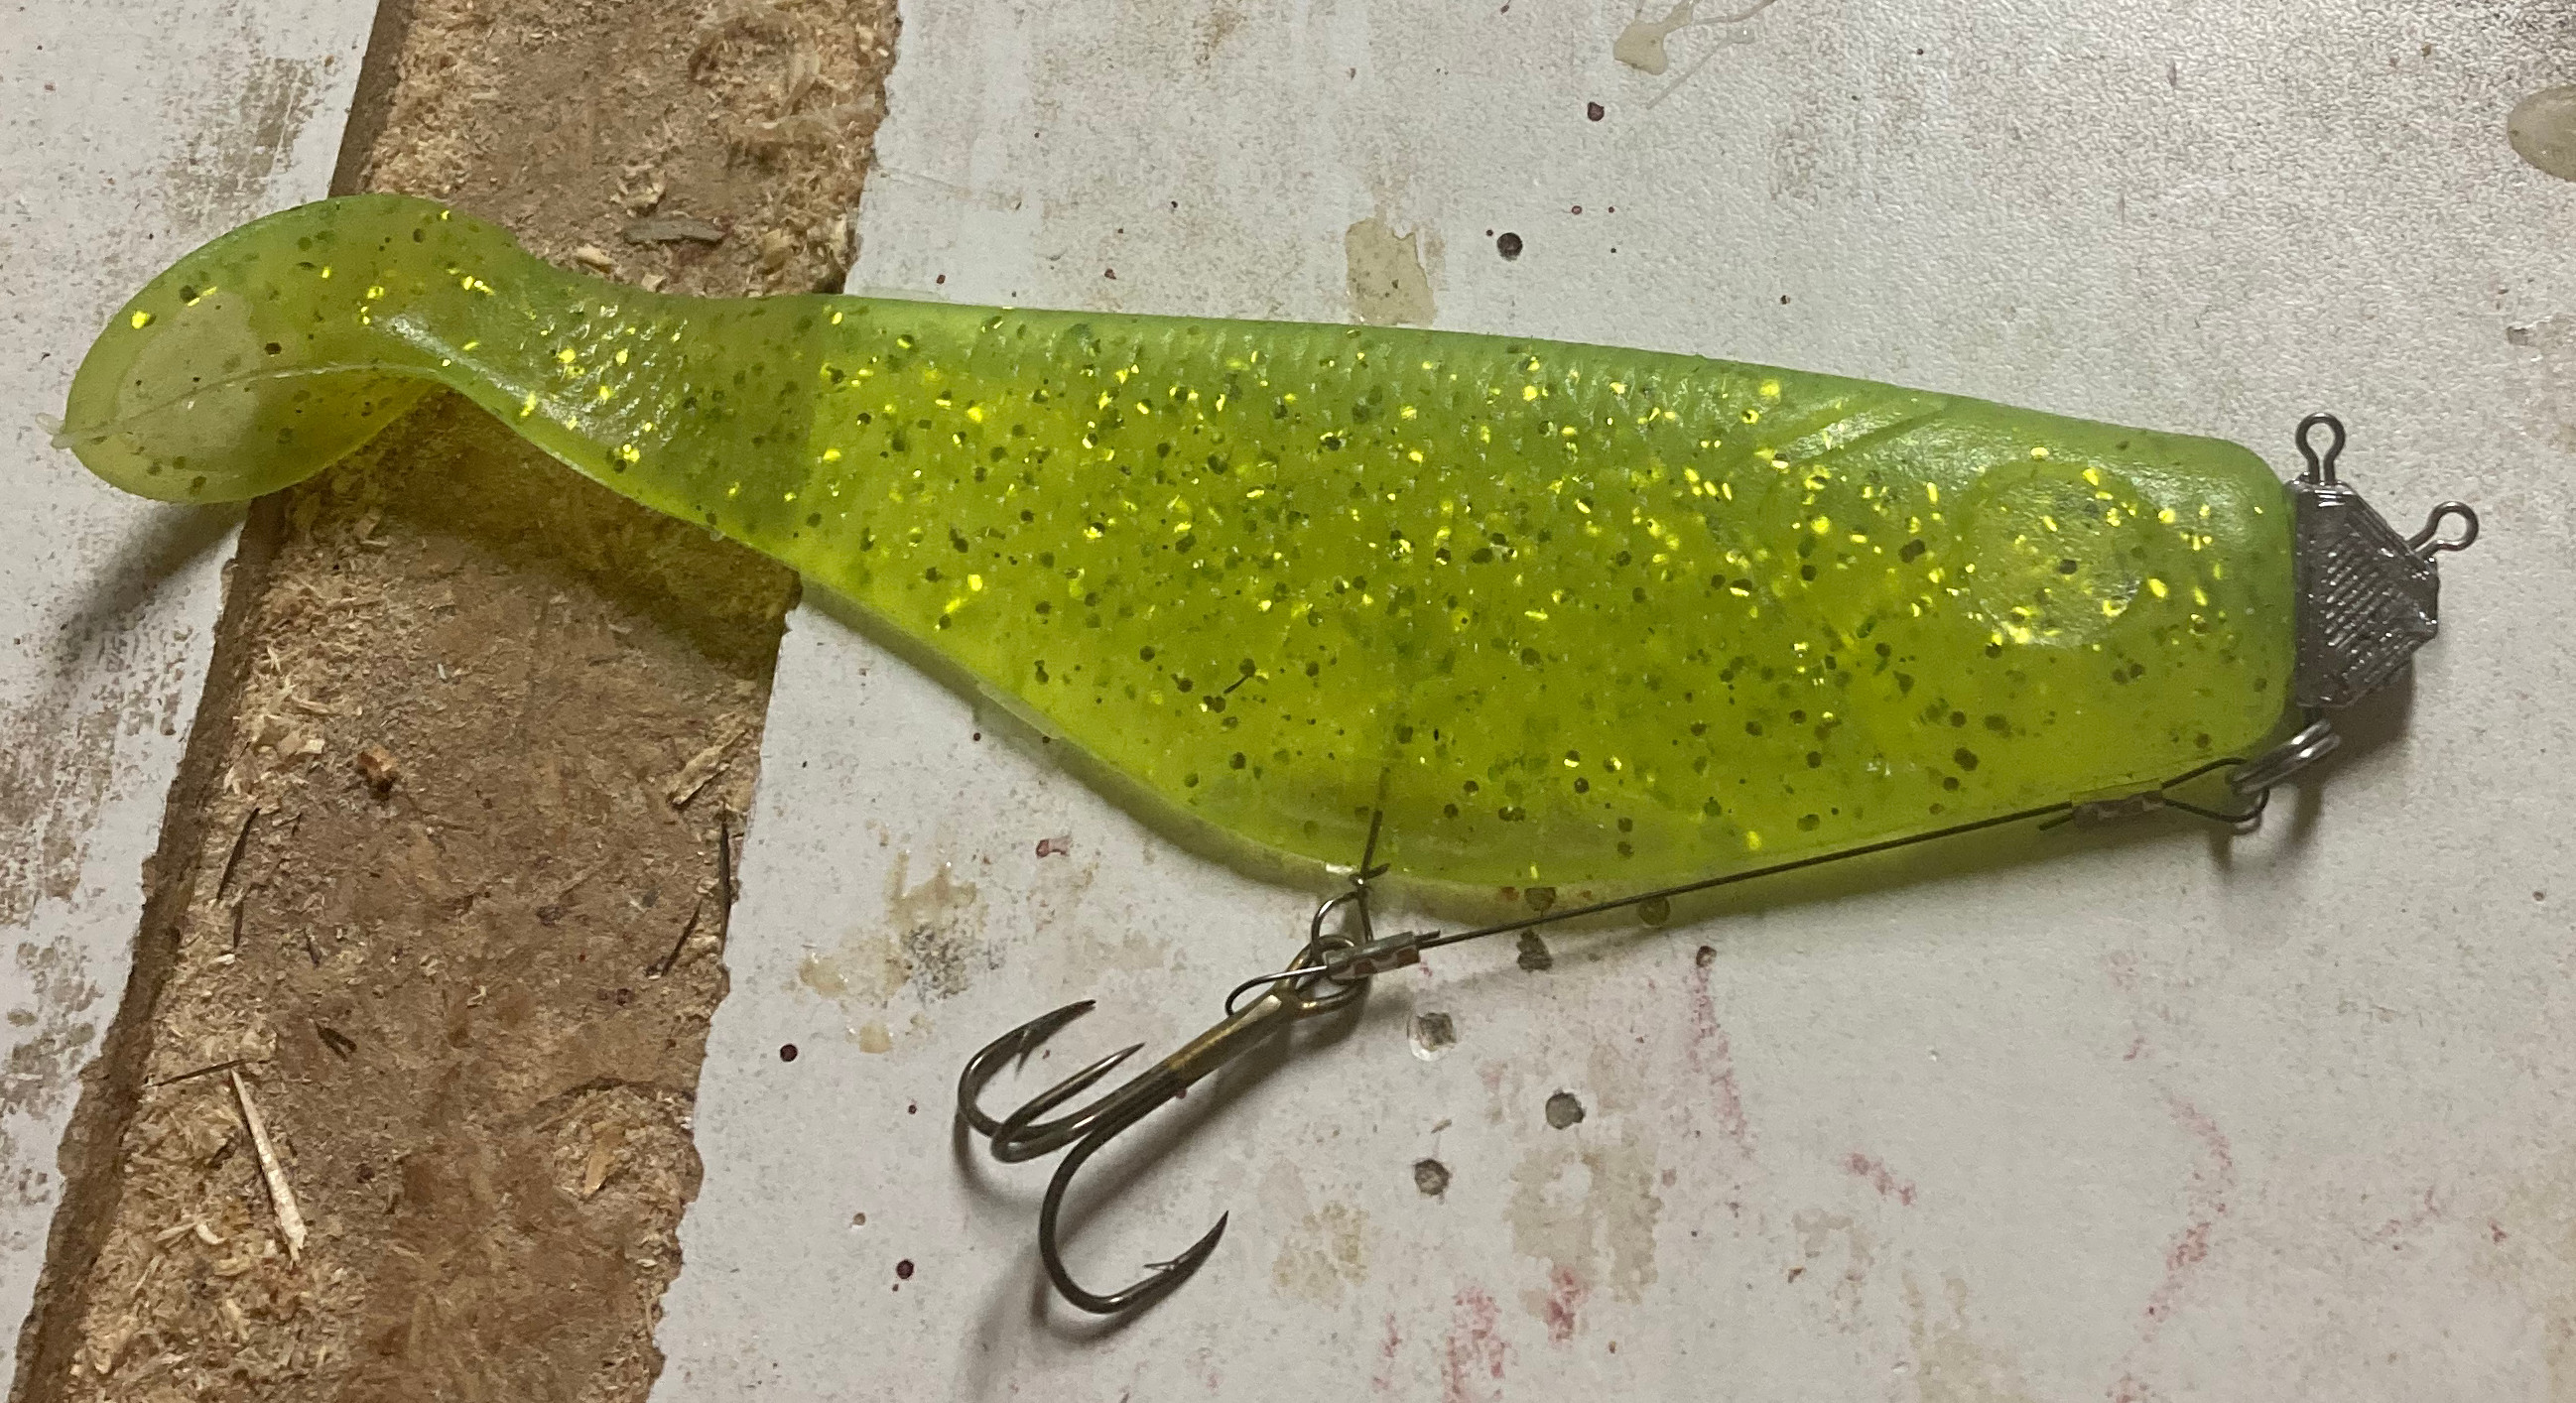 Screw in belly weight mold - Wire Baits -  - Tackle  Building Forums